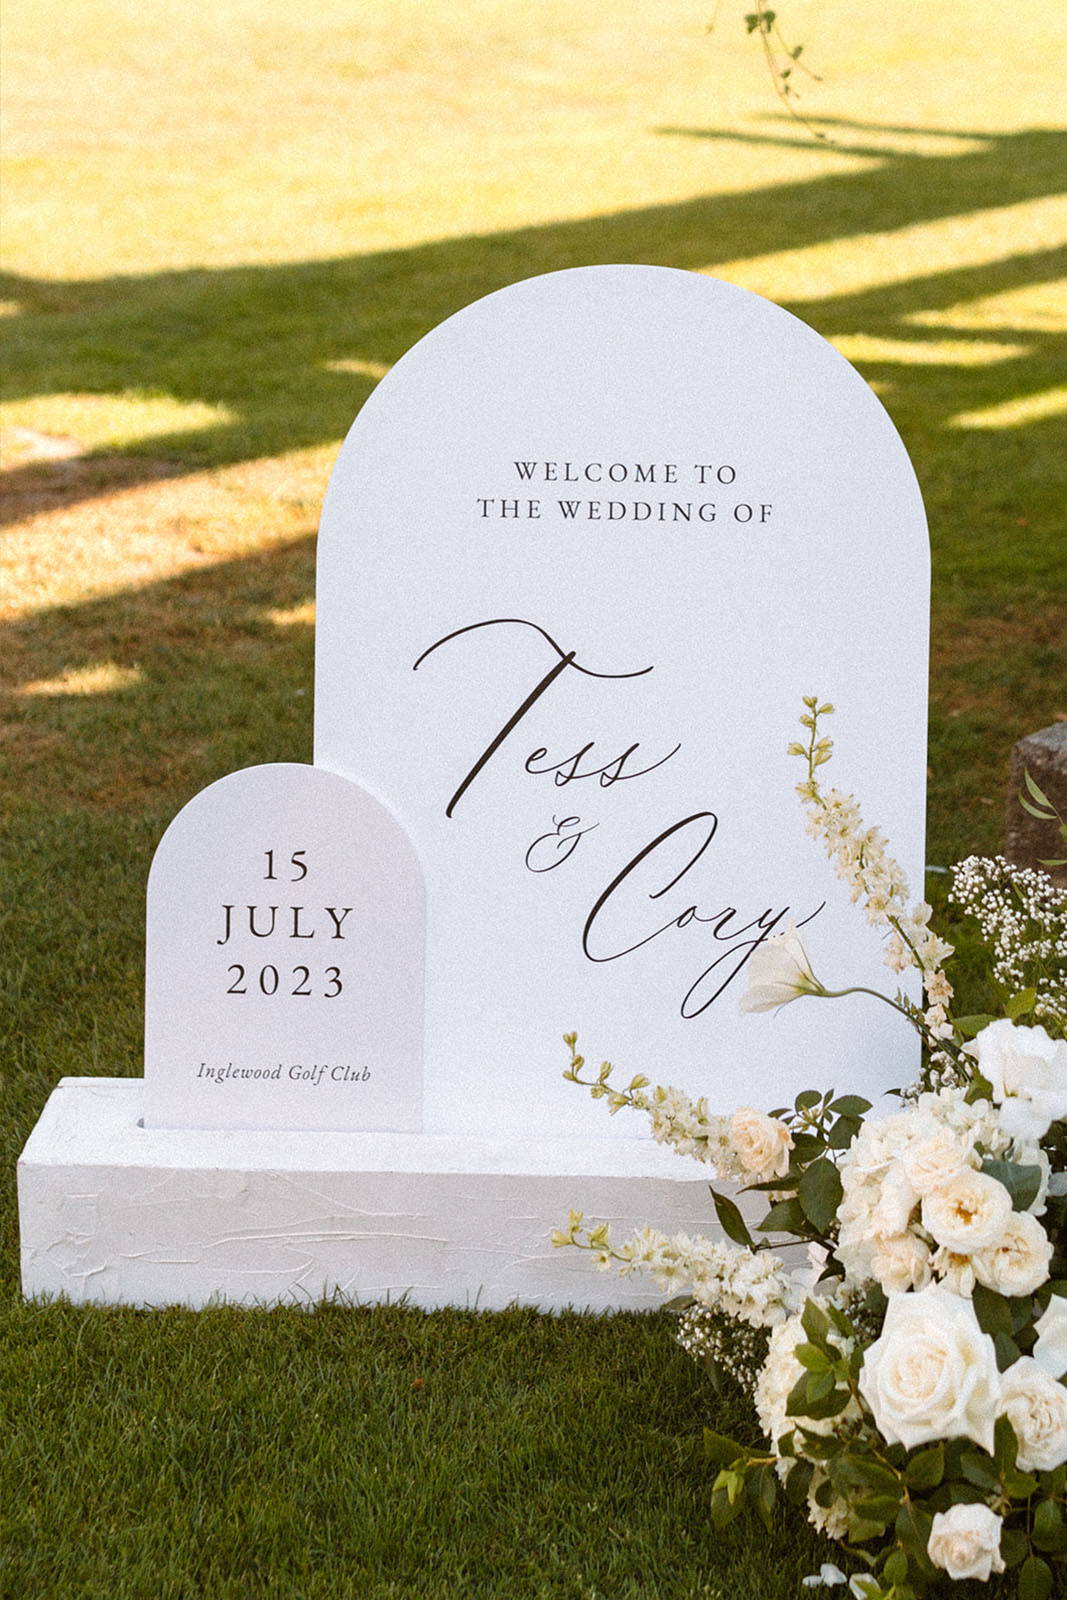 Wedding ‘grave’ with the wedding date and the bride and groom’s names